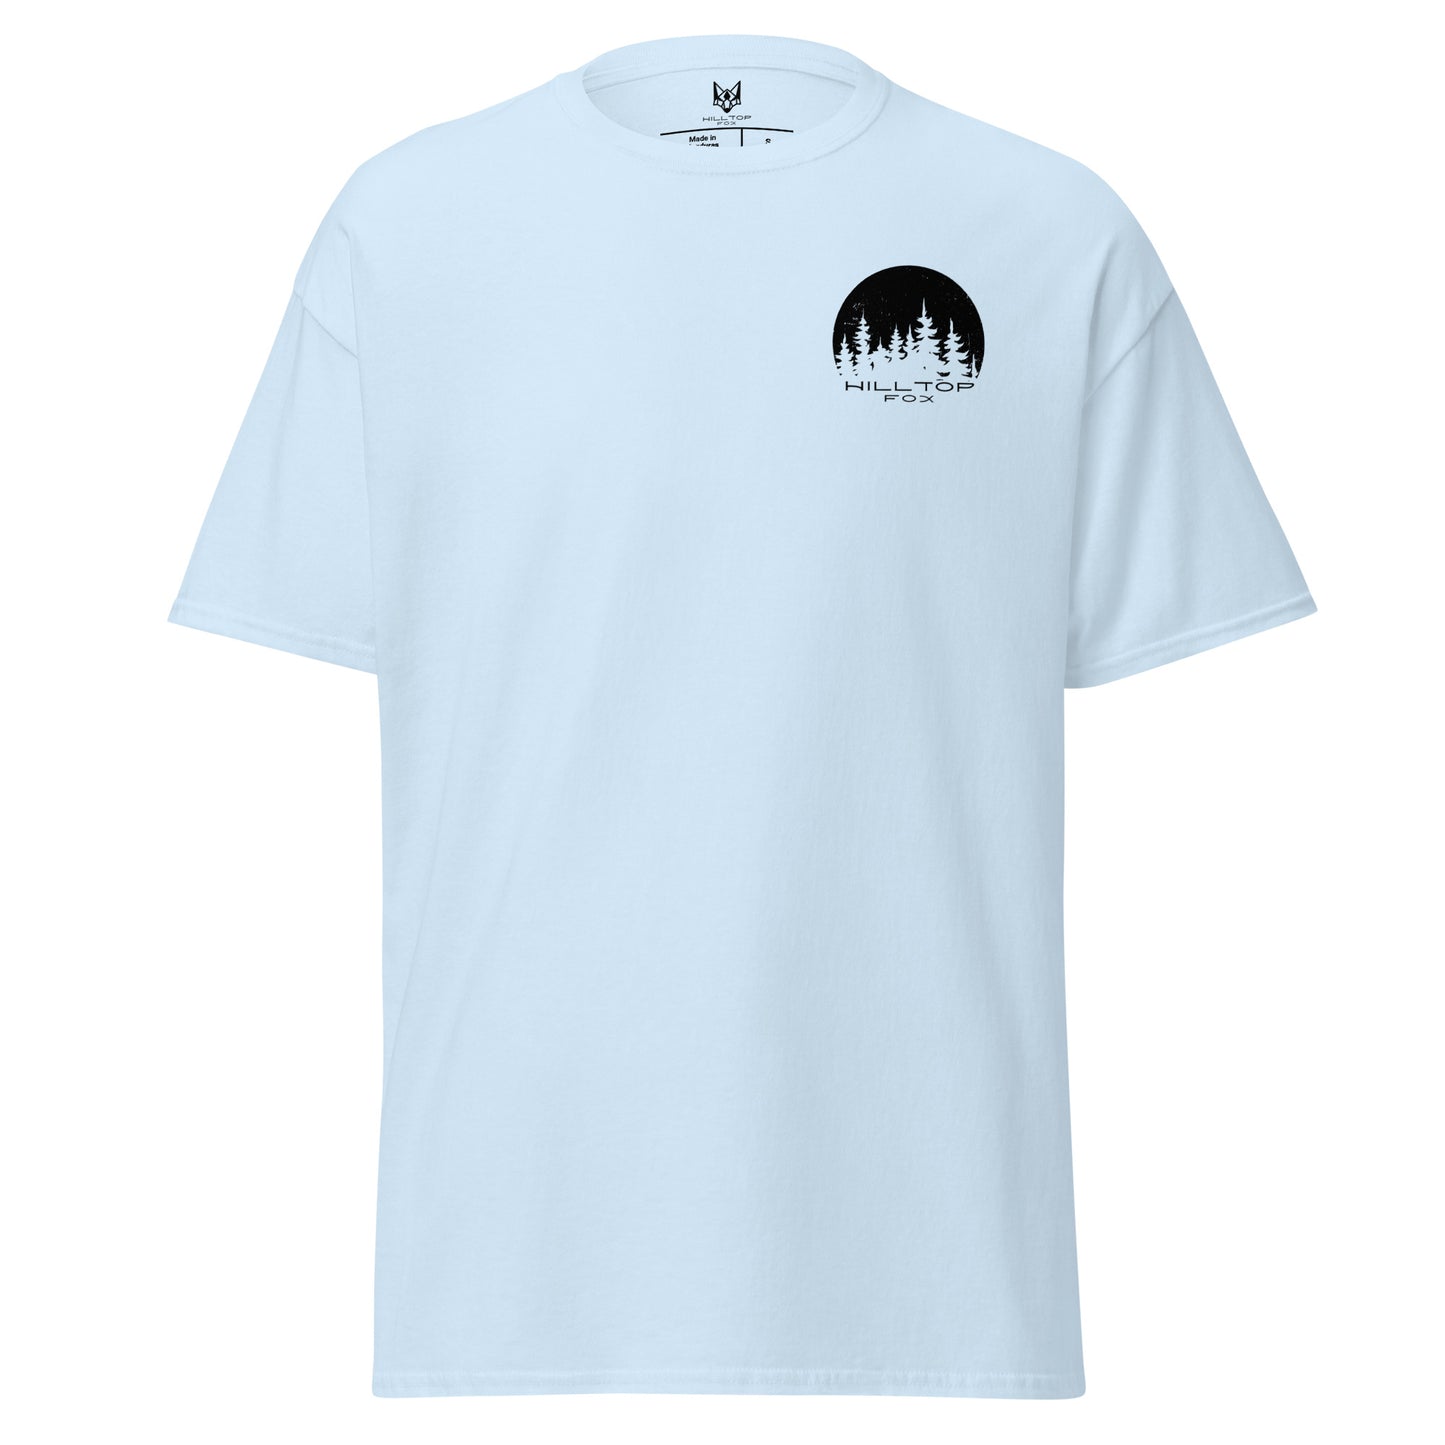 Hilltop Fox "The Pines" pocket style Tee